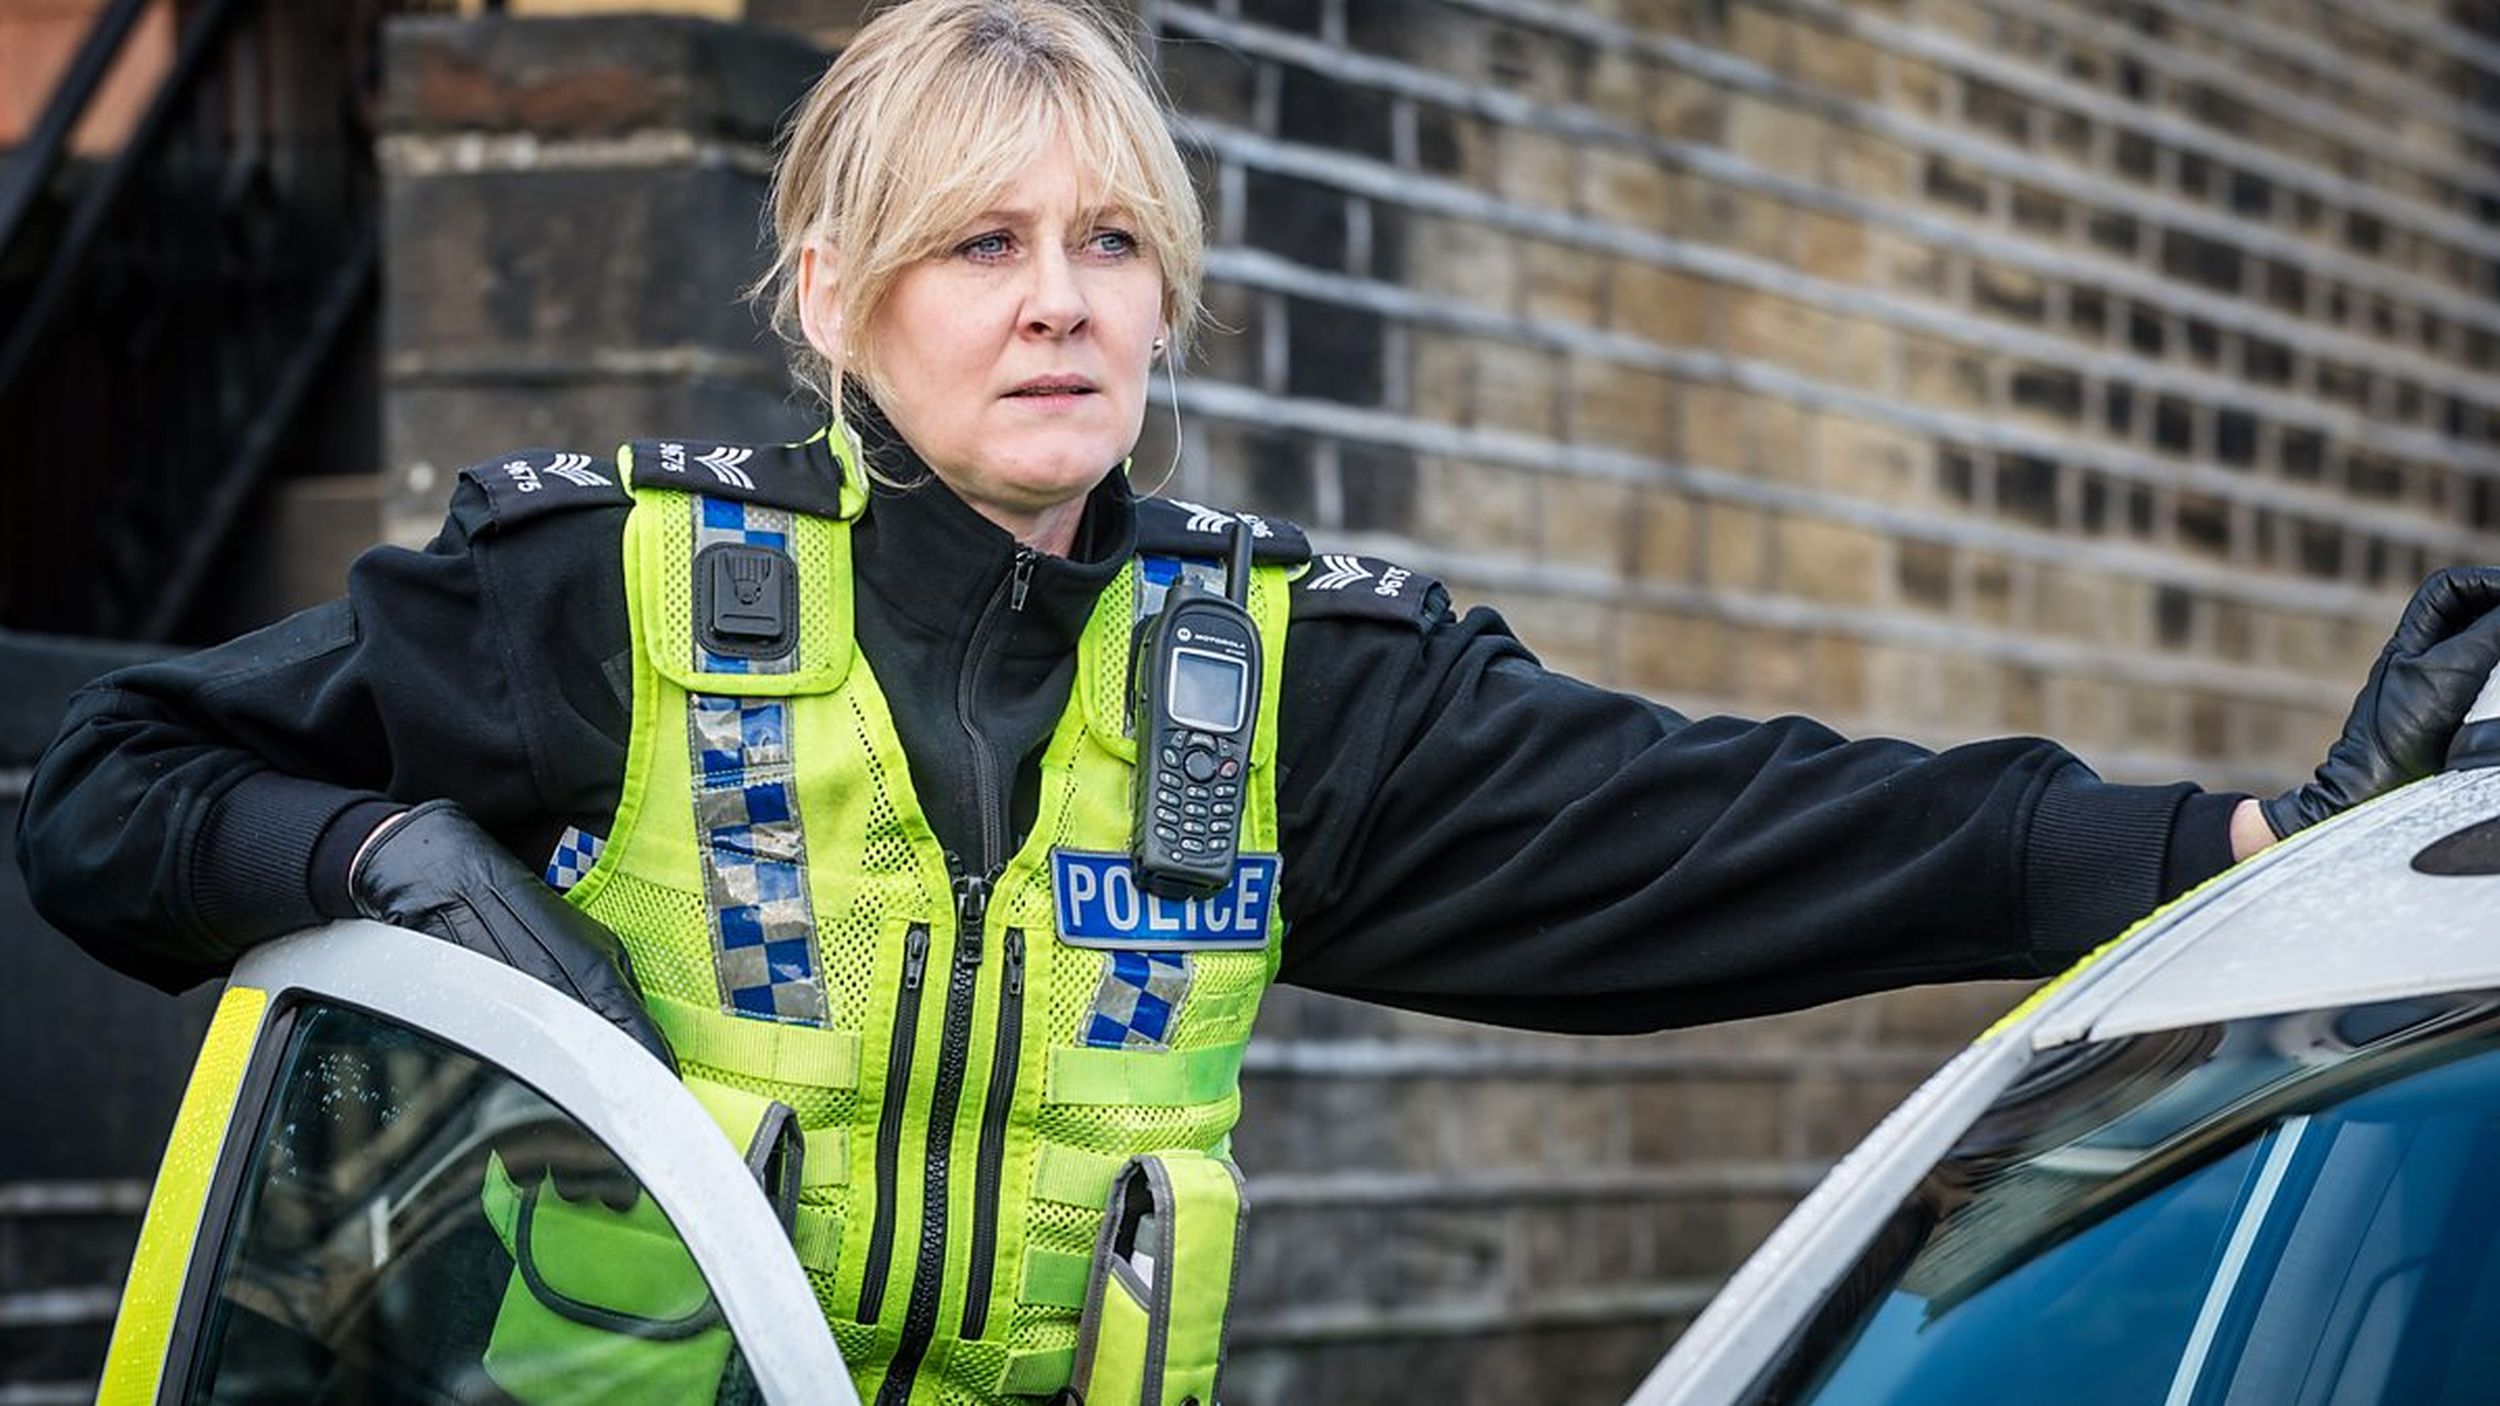 Sarah Lancashire as PC Catherine Cawood leans on her squad car in 'Happy Valley' series premiere